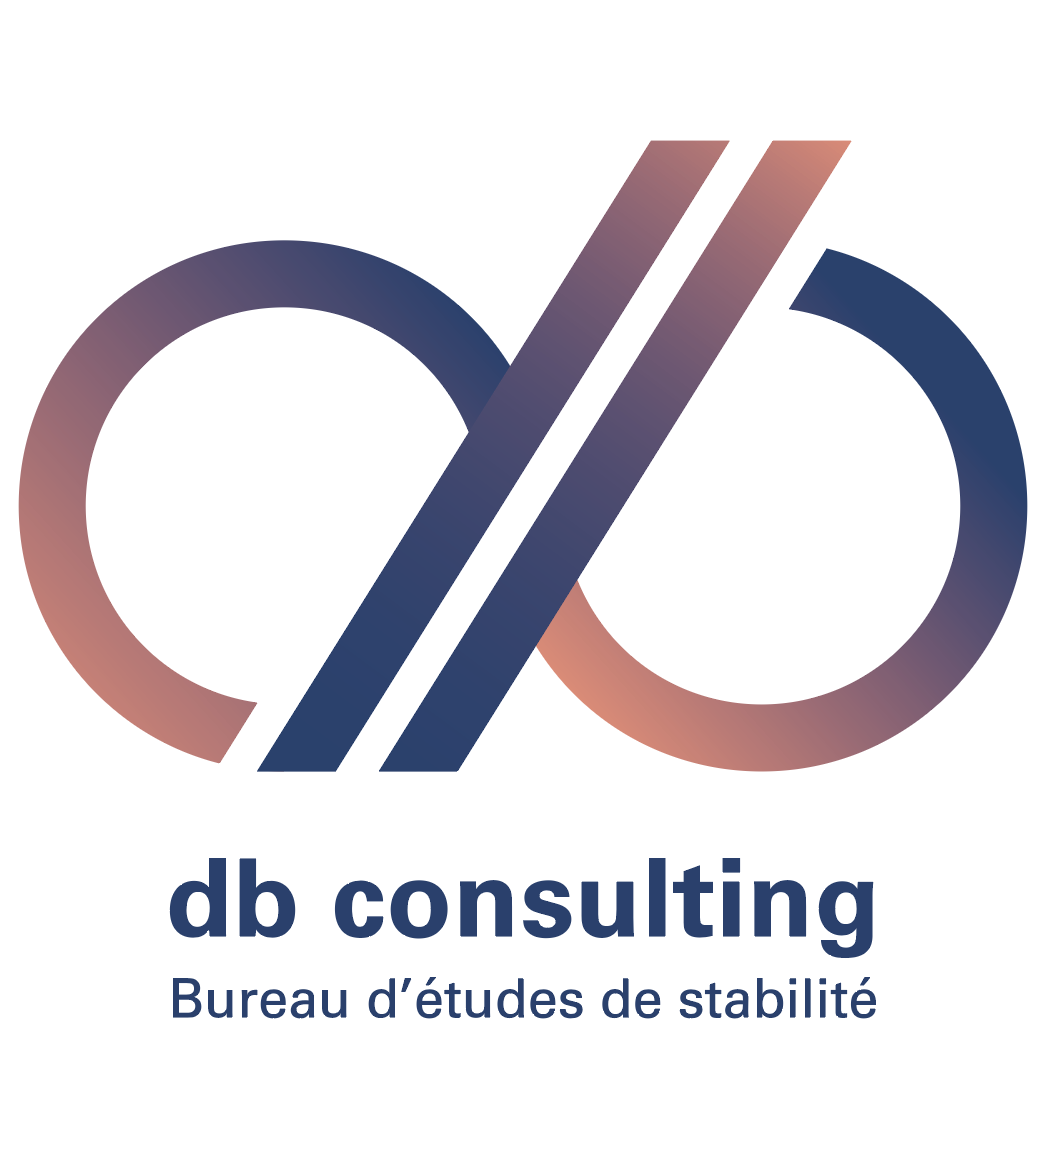 Dbconsulting Bes